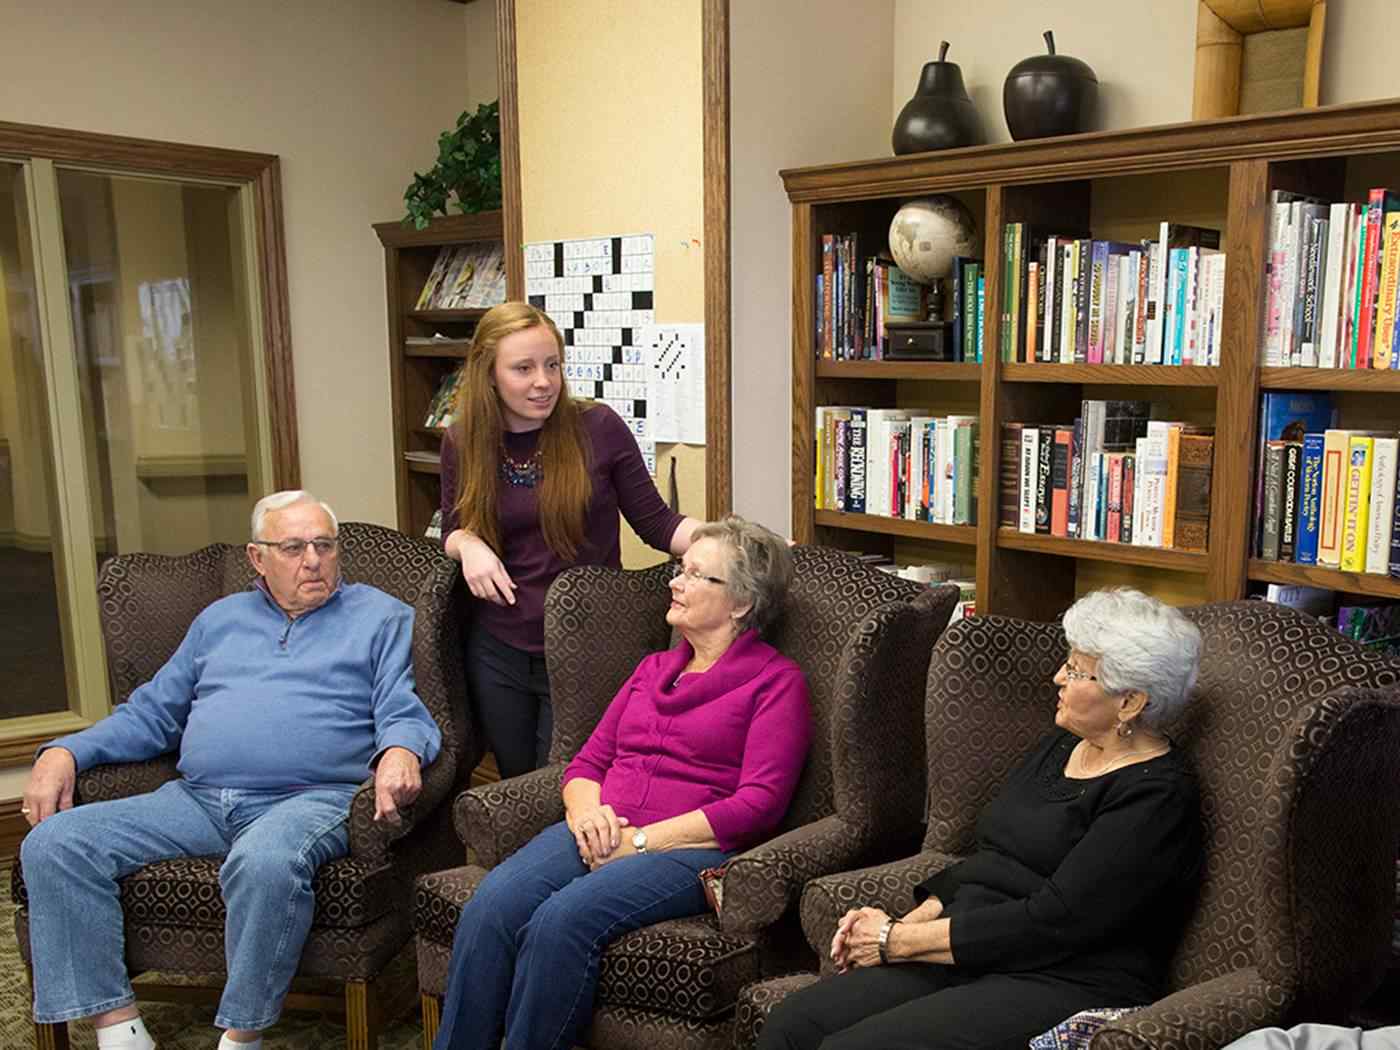 Student gathers with elder patients